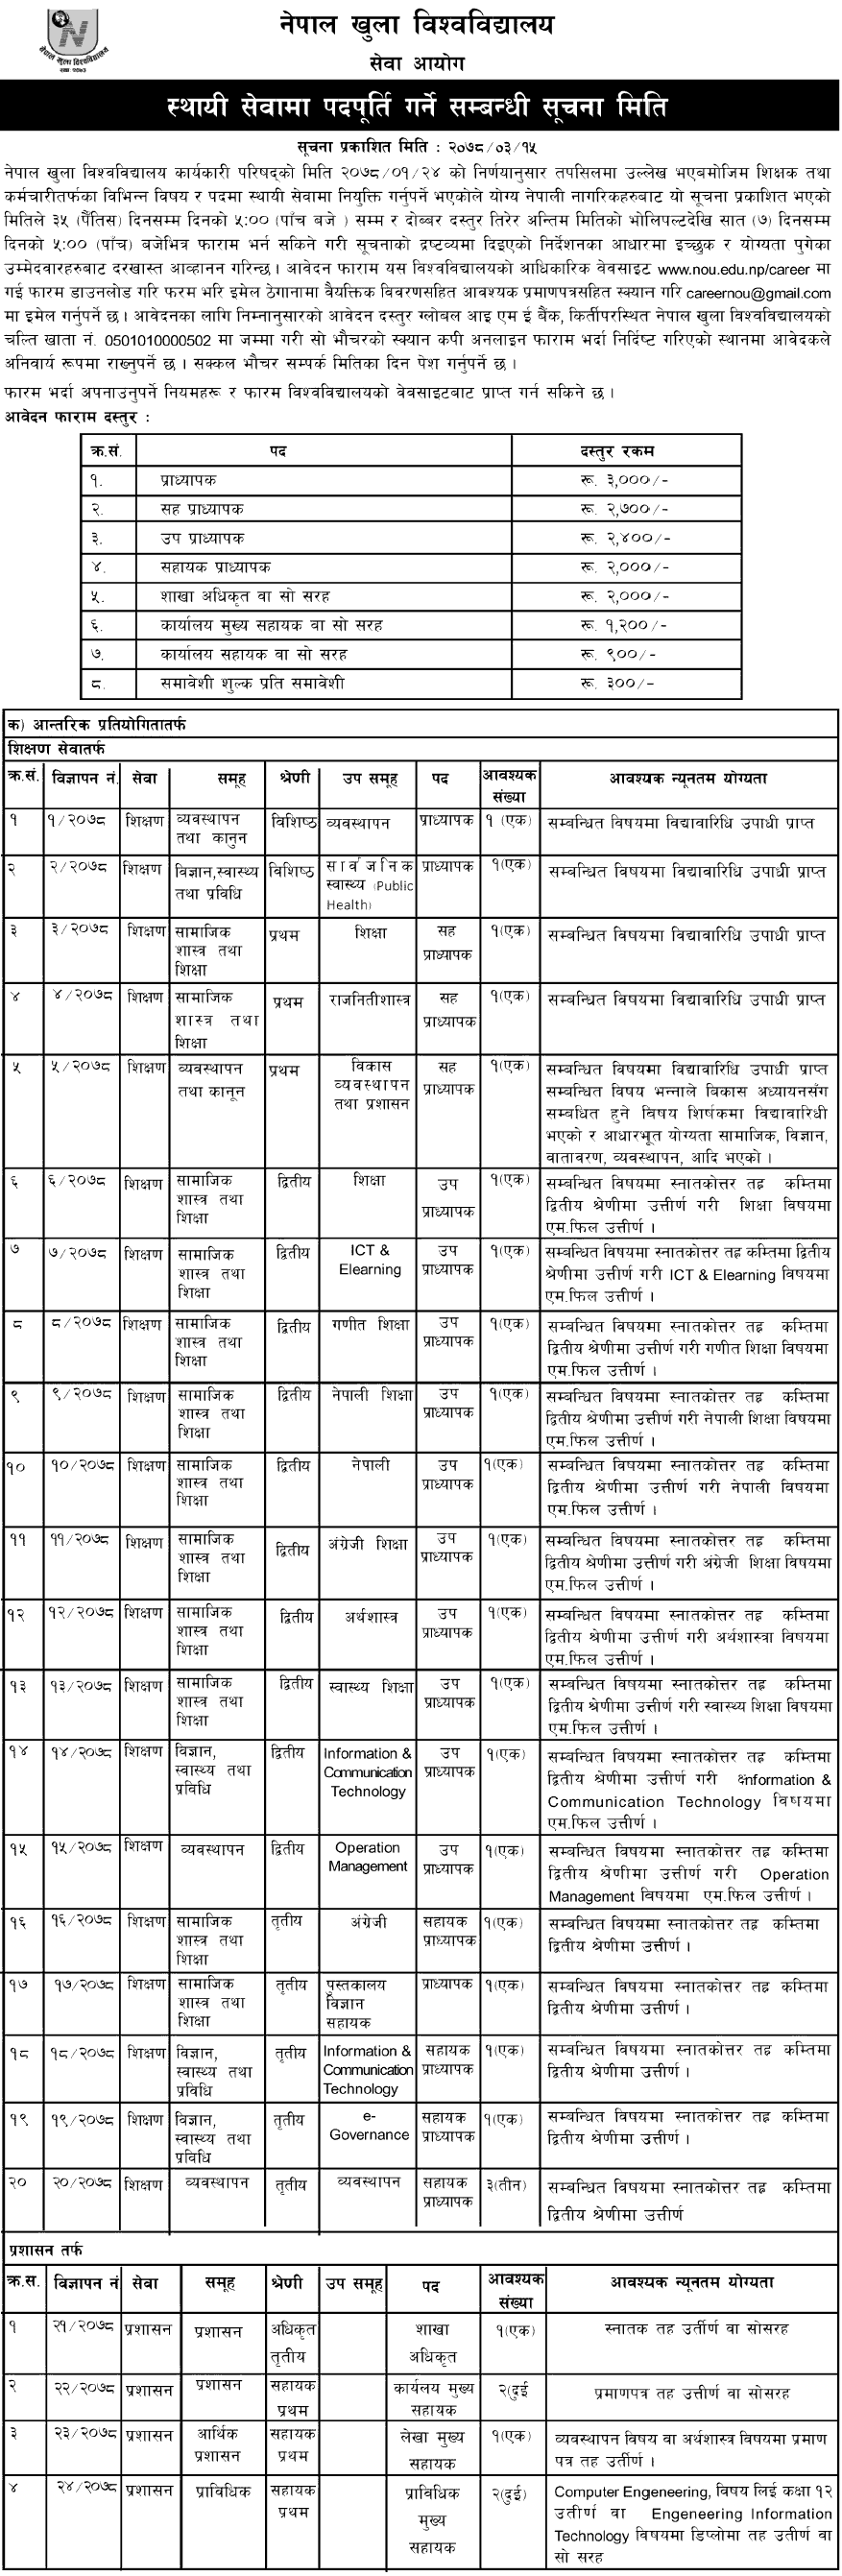 Nepal Open University Vacancy for Various Position 2078